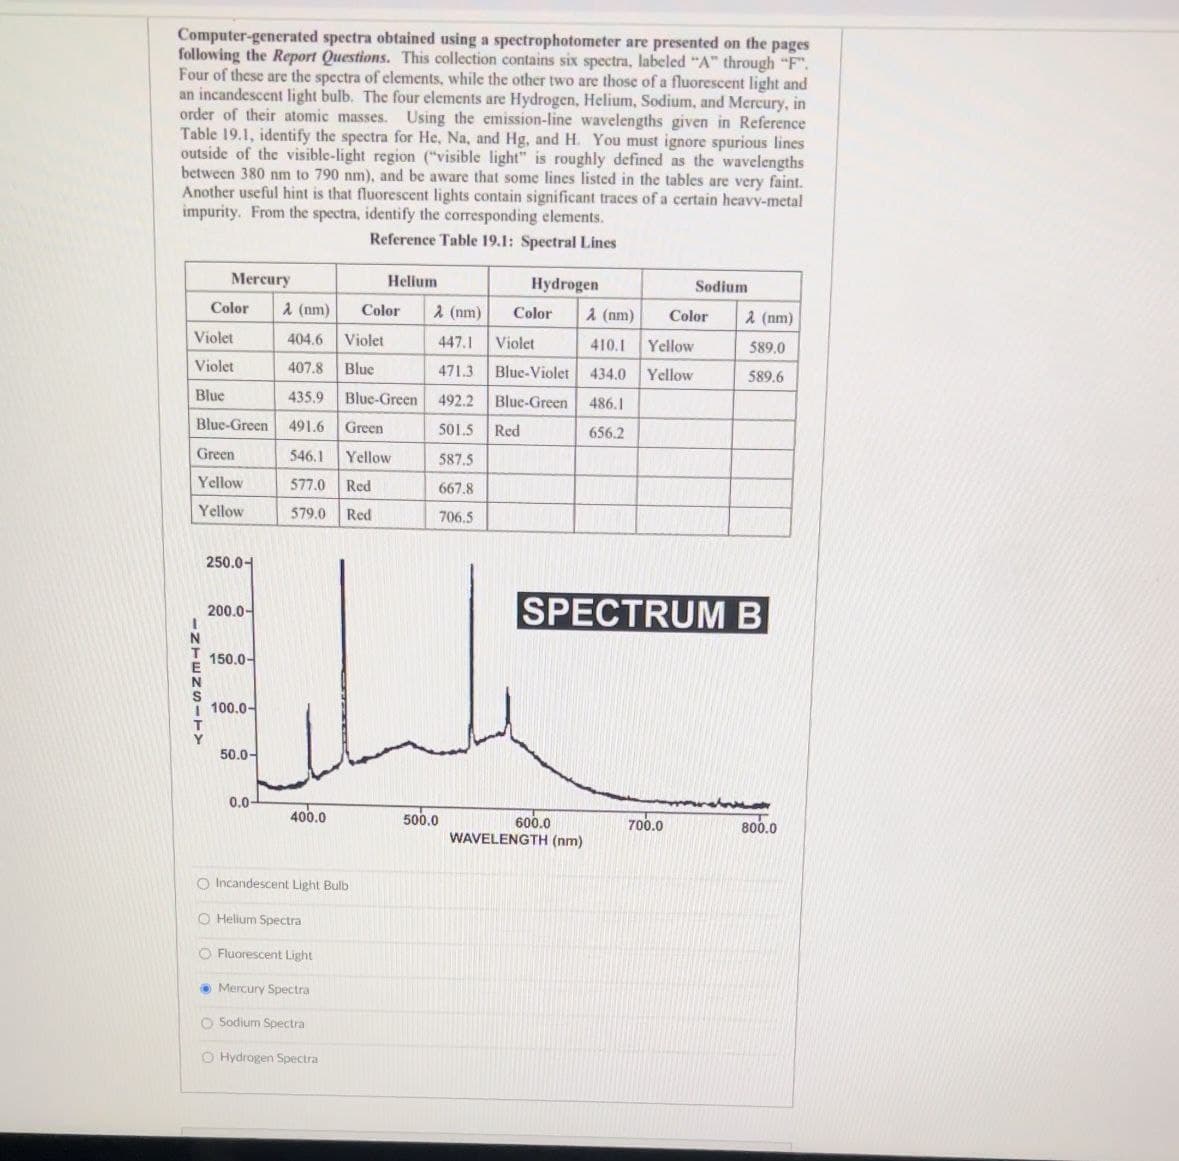 Computer-generated spectra obtained using a spectrophotometer are presented on the pages
following the Report Questions. This collection contains six spectra, labeled "A" through "F".
Four of these are the spectra of elements, while the other two are those of a fluorescent light and
an incandescent light bulb. The four elements are Hydrogen, Helium, Sodium, and Mercury, in
order of their atomic masses. Using the emission-line wavelengths given in Reference
Table 19.1, identify the spectra for He, Na, and Hg, and H. You must ignore spurious lines
outside of the visible-light region ("visible light" is roughly defined as the wavelengths
between 380 nm to 790 nm), and be aware that some lines listed in the tables are very faint.
Another useful hint is that fluorescent lights contain significant traces of a certain heavy-metal
impurity. From the spectra, identify the corresponding elements.
Reference Table 19.1: Spectral Lines
Mercury
Helium
Hydrogen
Sodium
Color
λ(nm)
Color
λ (nm)
Color
1 (nm)
Color 2 (nm)
Violet
404.6 Violet
447.1
Violet
410.1 Yellow
589.0
Violet
407.8
Blue
471.3
Blue-Violet 434.0 Yellow
589.6
Blue
435.9
Blue-Green 492.2
Blue-Green 486.1
Blue-Green 491.6
Green
501.5 Red
656.2
Green
546.1
Yellow
587.5
Yellow
577.0 Red
667.8
Yellow
579.0 Red
706.5
250.0
200.0-
INTENSITY
150.0-
100.0-
50.0-
SPECTRUM B
0.0-
400.0
500.0
600.0
700.0
800.0
WAVELENGTH (nm)
O Incandescent Light Bulb
O Helium Spectra
Fluorescent Light
Mercury Spectra
O Sodium Spectra
O Hydrogen Spectra